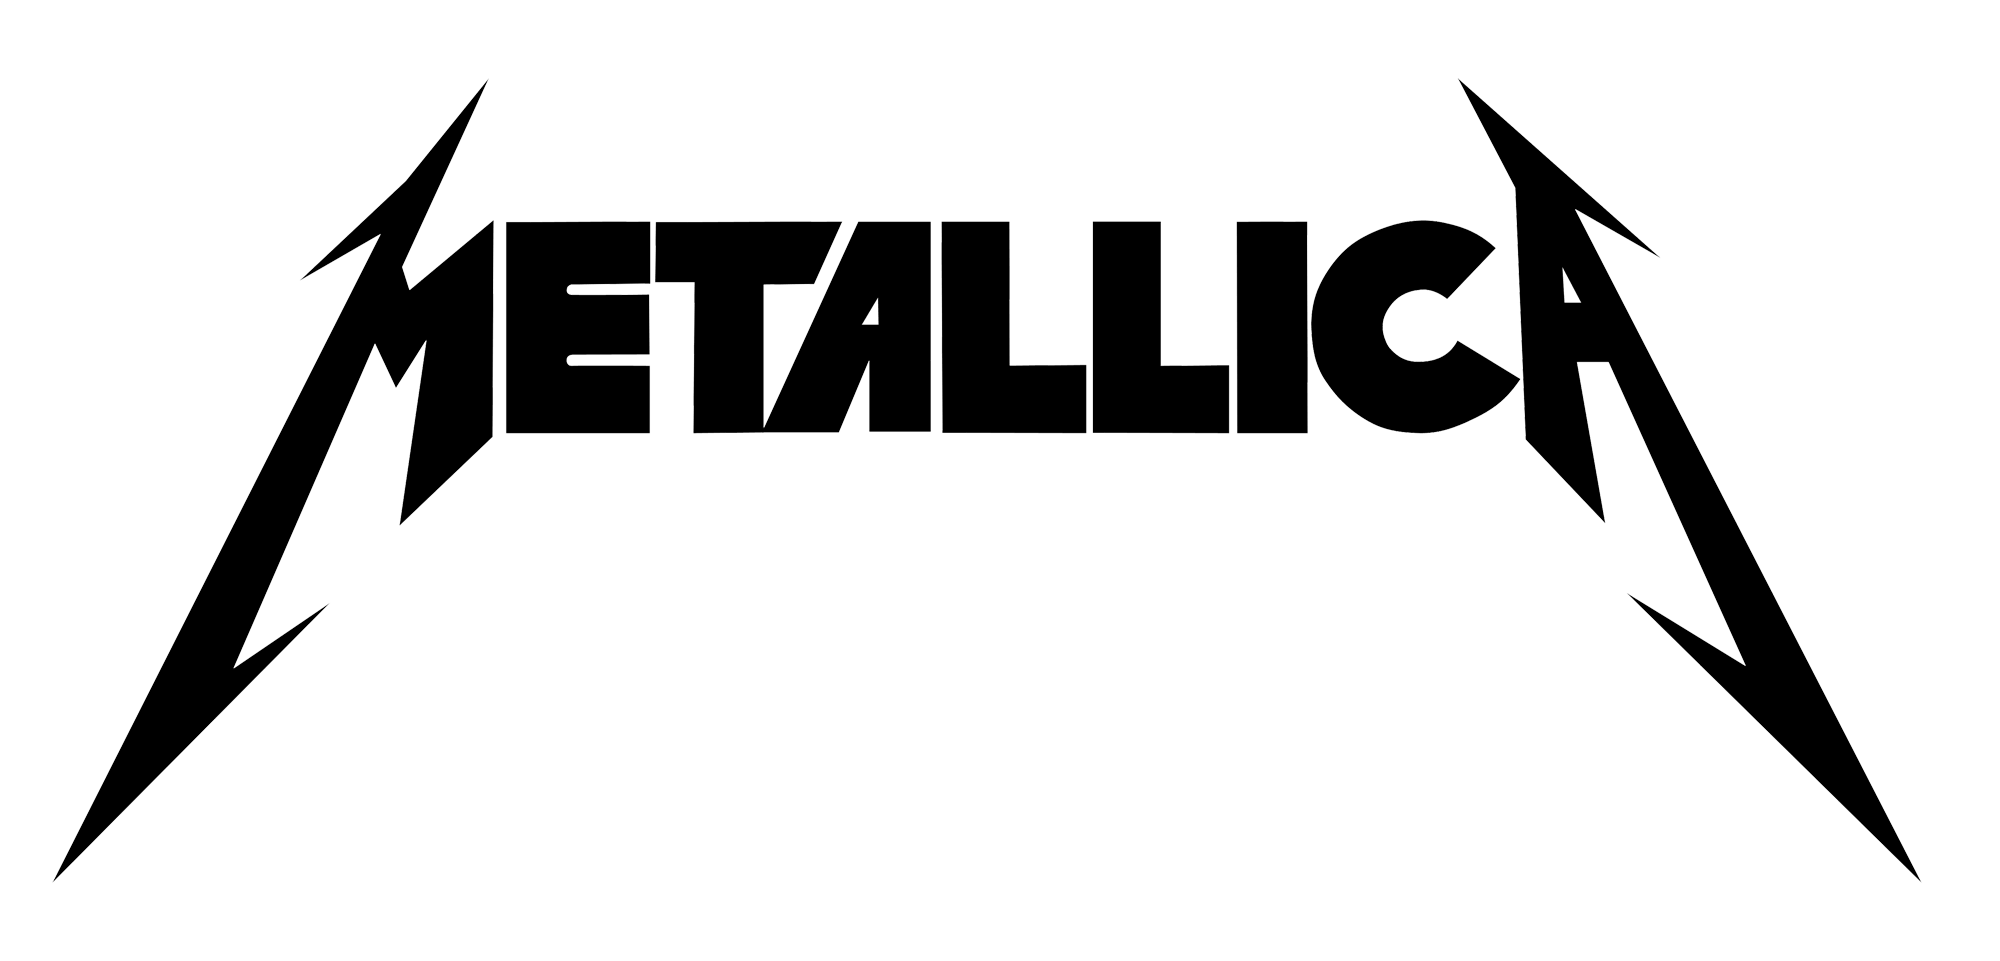 Red Metallica Logo - Metallica Logo, Metallica Symbol Meaning, History and Evolution